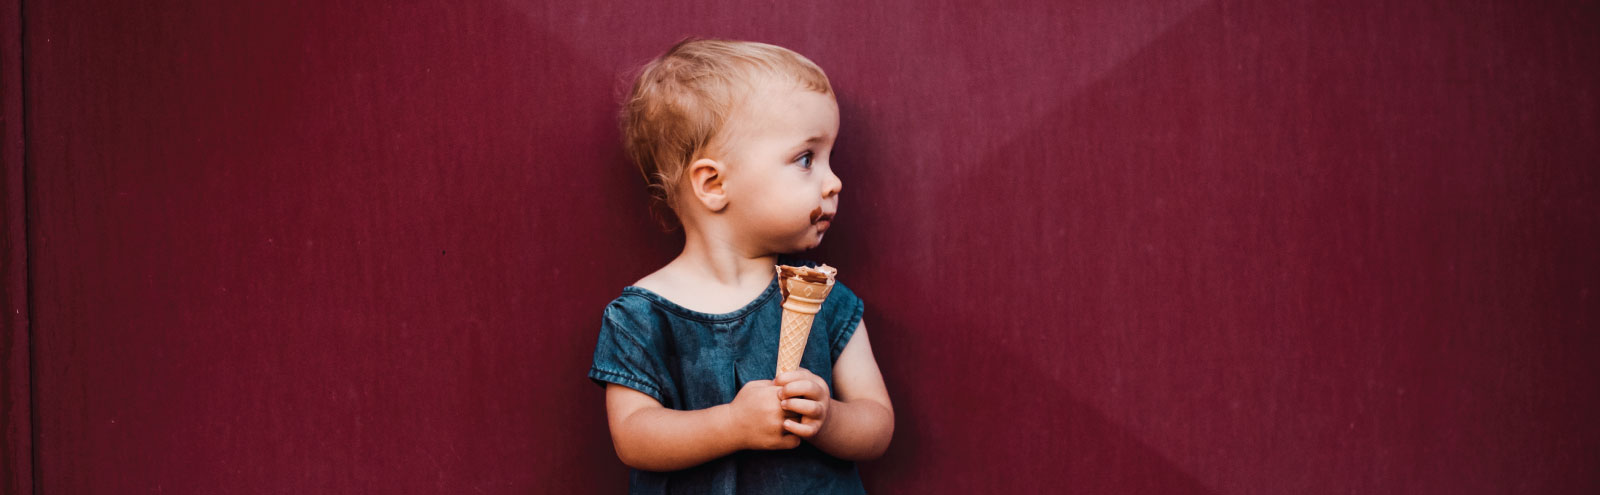 Child holding ice cream cone in front of a burgundy wall.